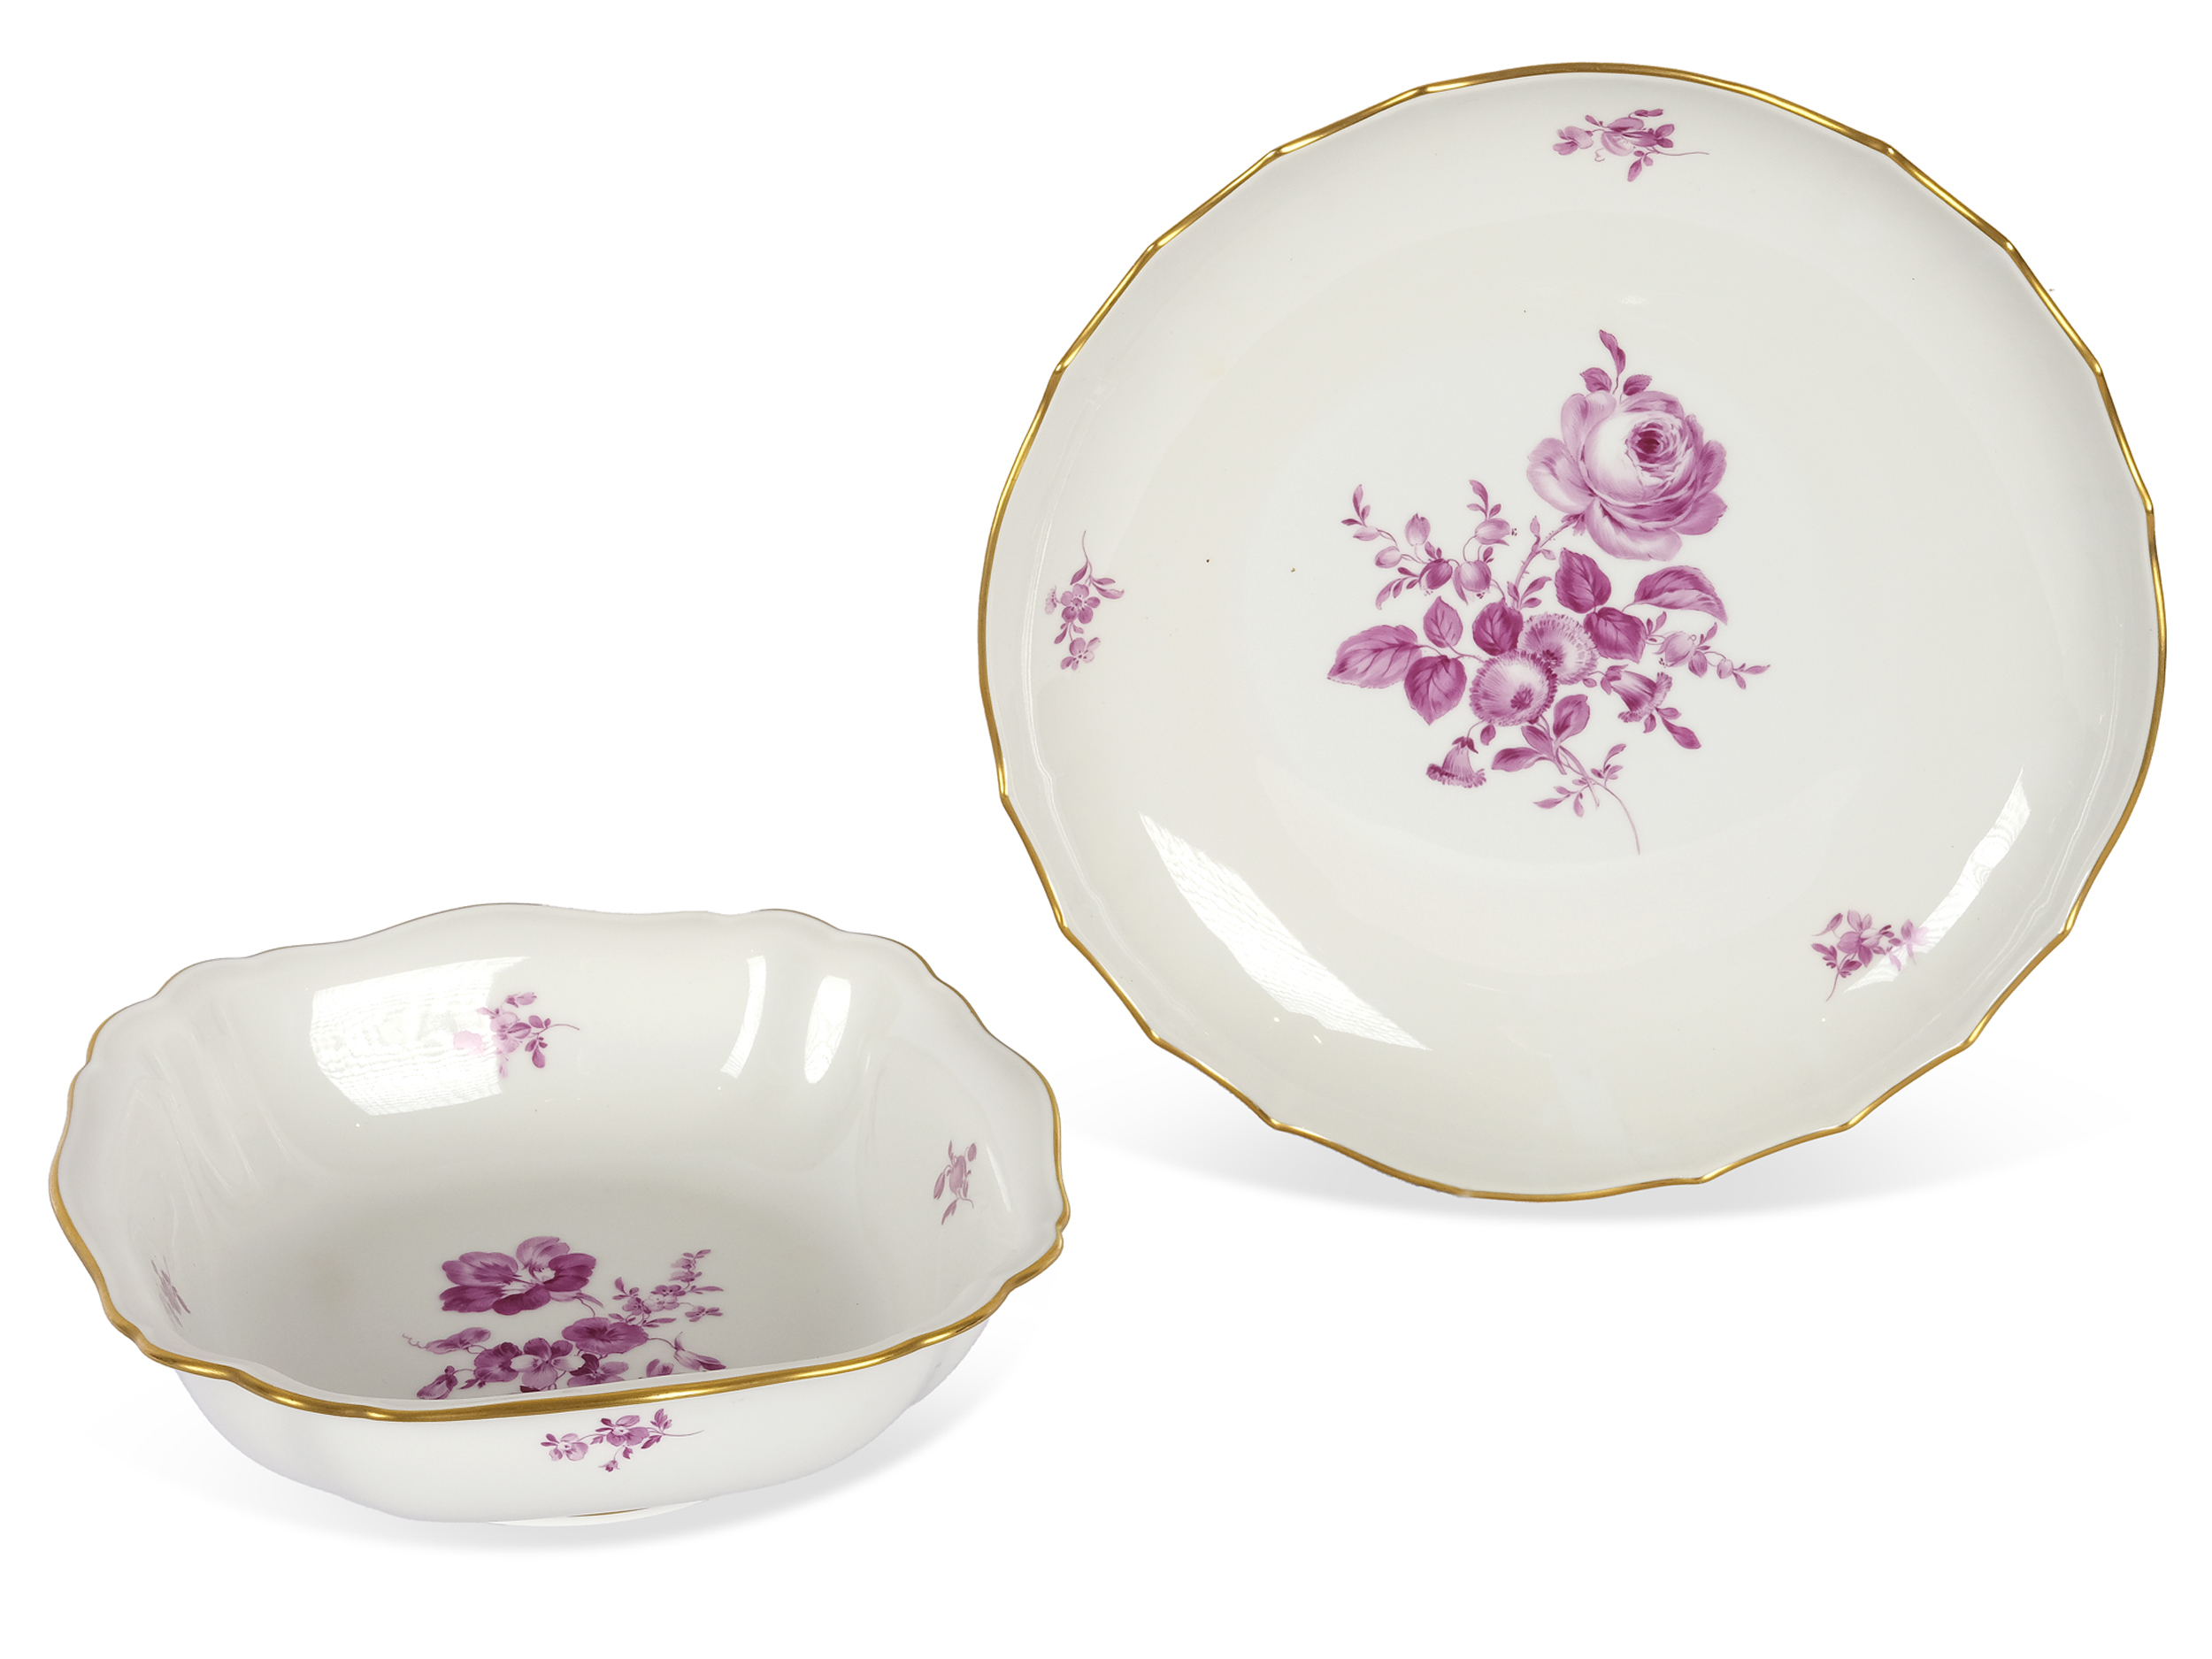 Dinner service for 6 persons, 24-piece, Violet foral decor, Meissen - Image 5 of 7